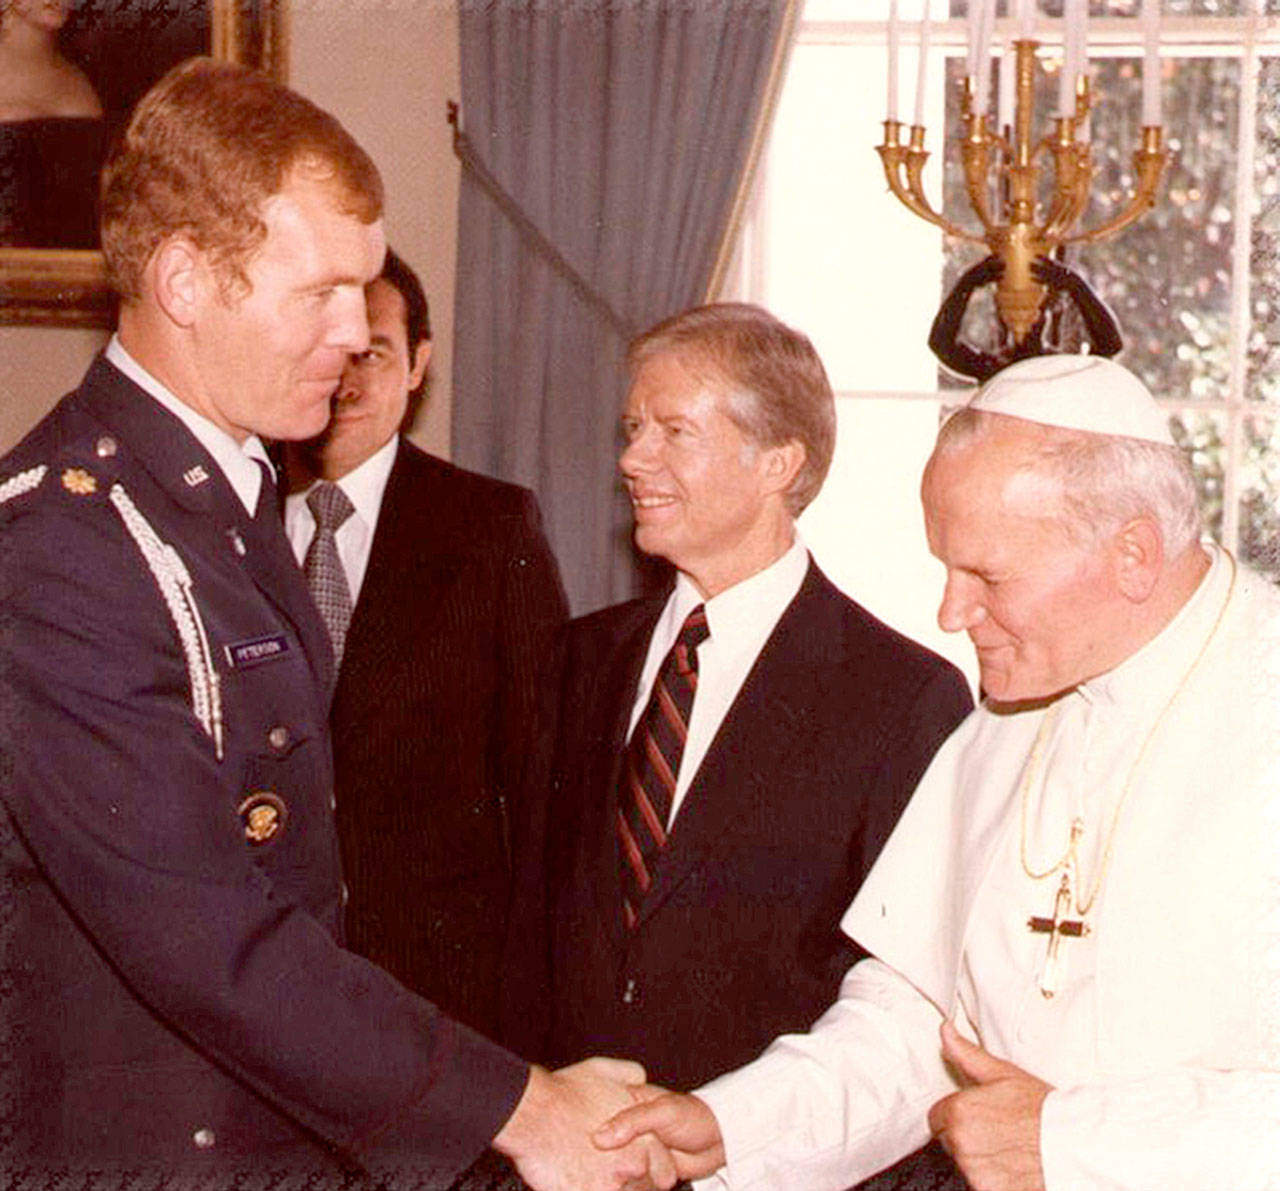 Port Angeles graduate Bob Peterson, left, meets with Pope John Paul II while President Jimmy Carter looks on. Peterson was a U.S. Air Force aide to Carter in the late 1970s.